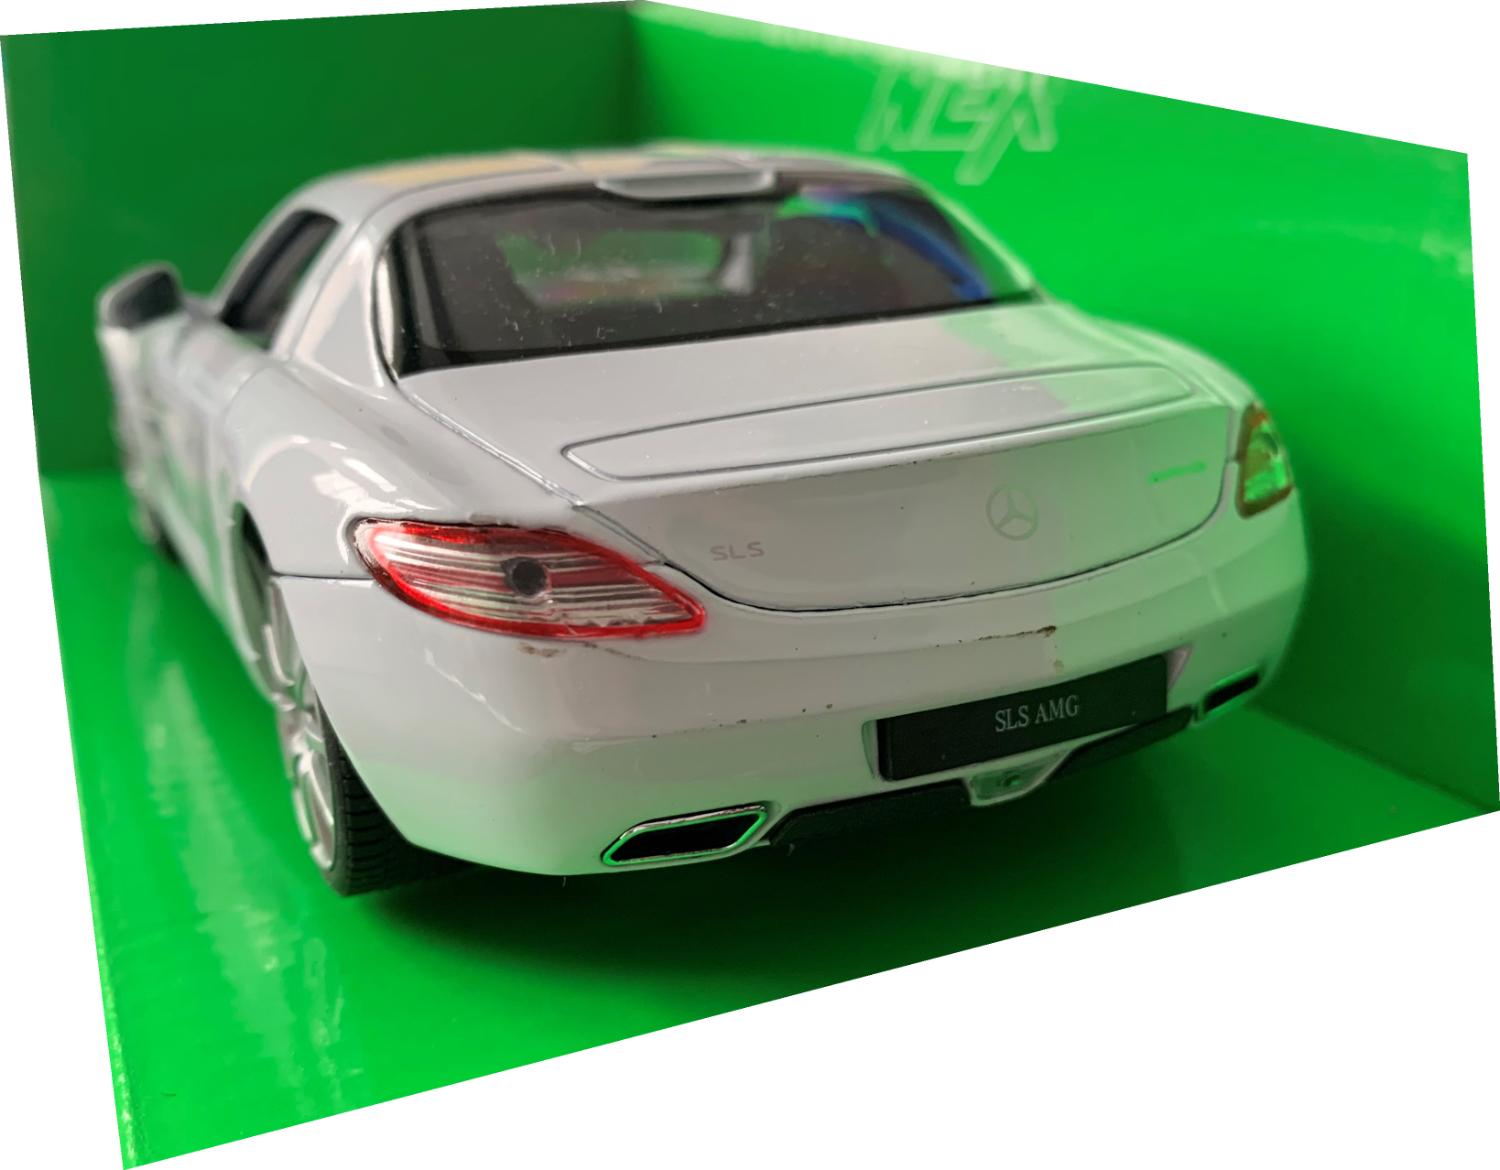 Mercedes Benz SLS AMG (C197) in white 1:24 scale model from Welly